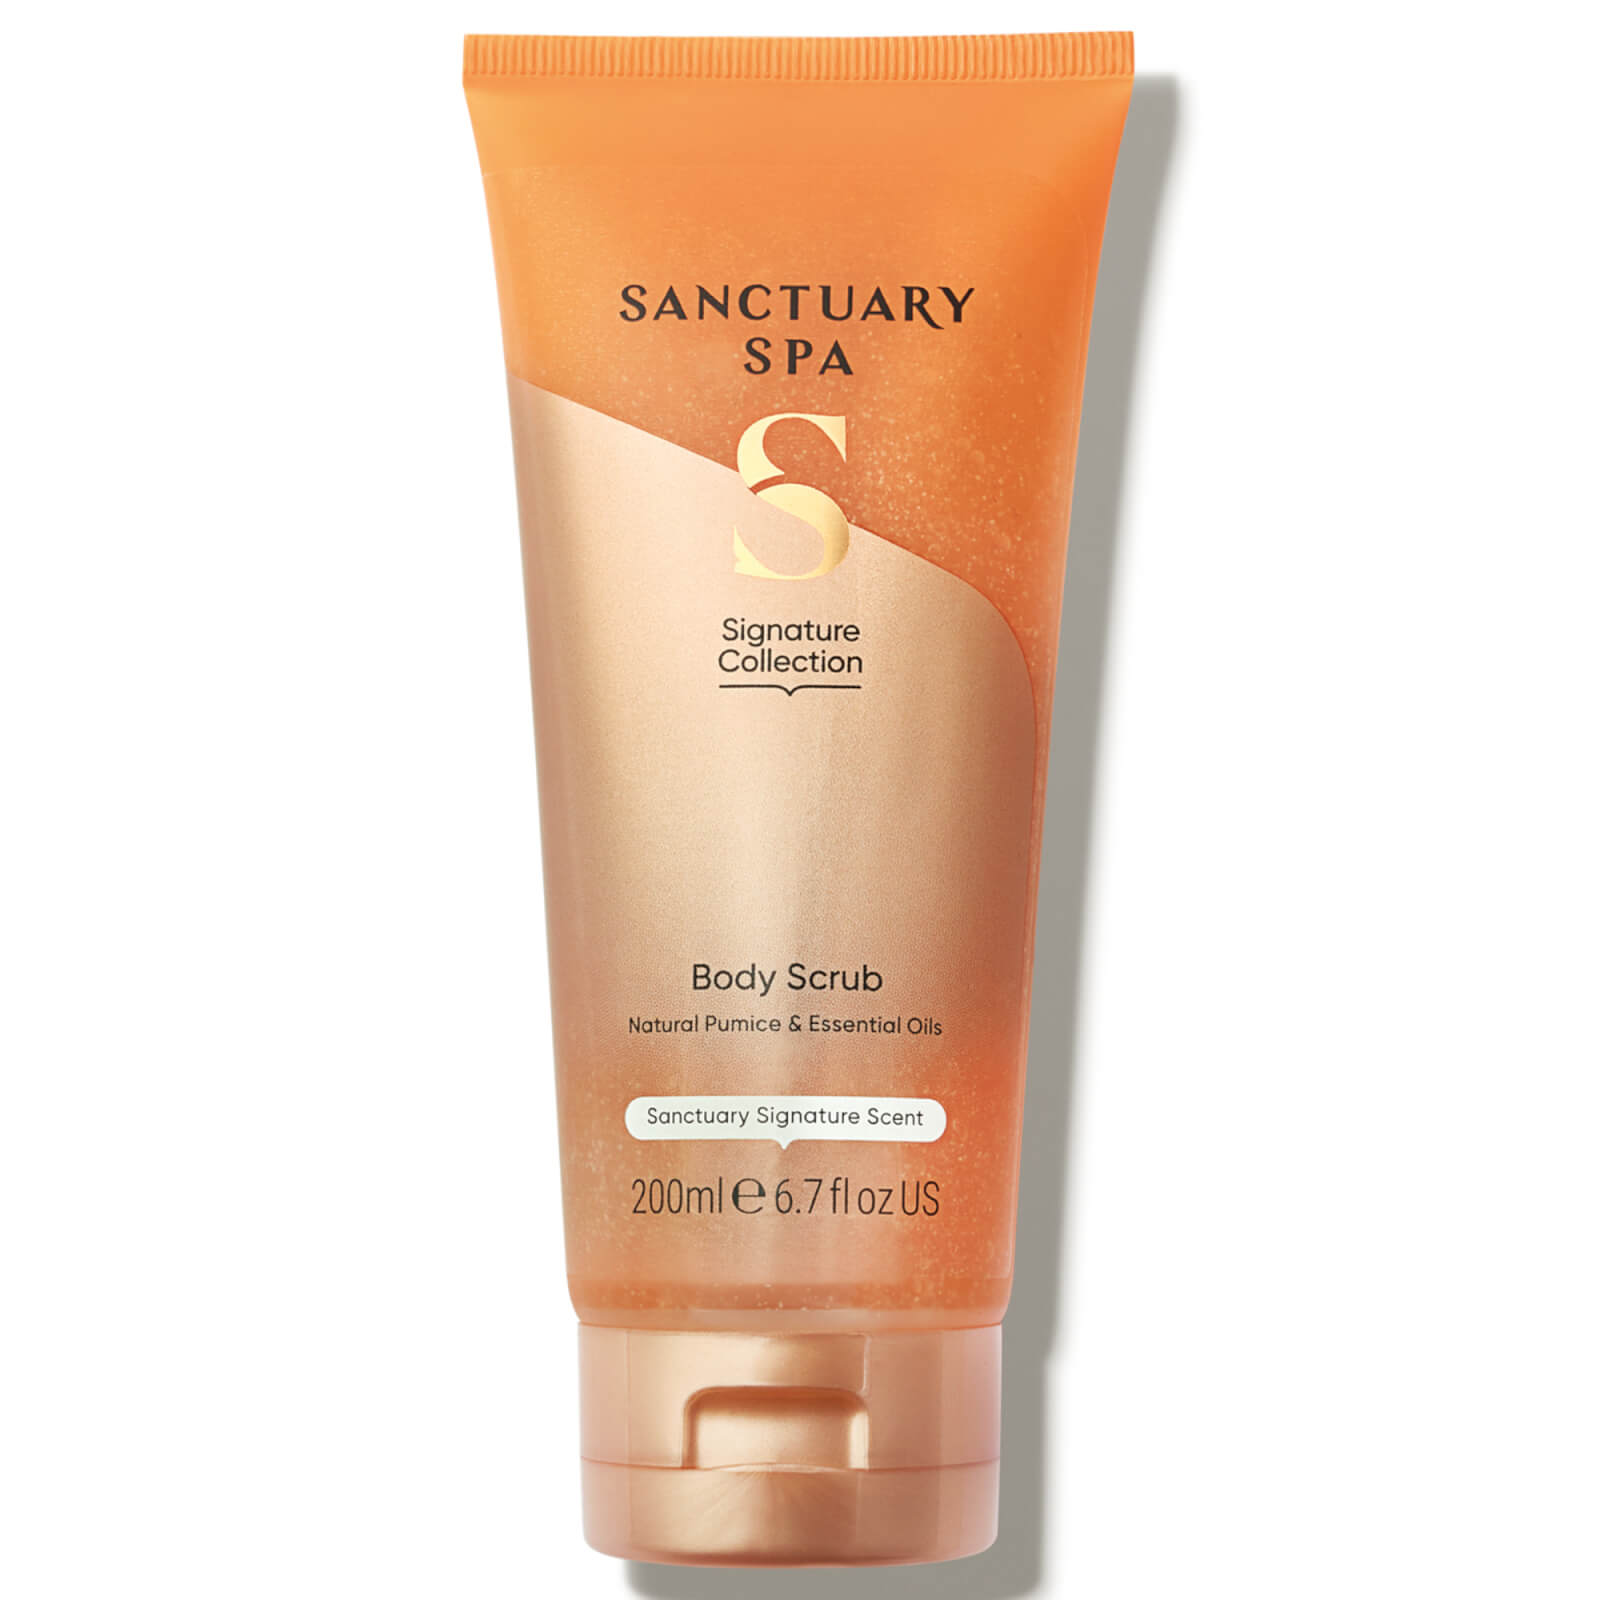 Photos - Facial / Body Cleansing Product Sanctuary Spa Signature Collection Body Scrub 200ml 100110561